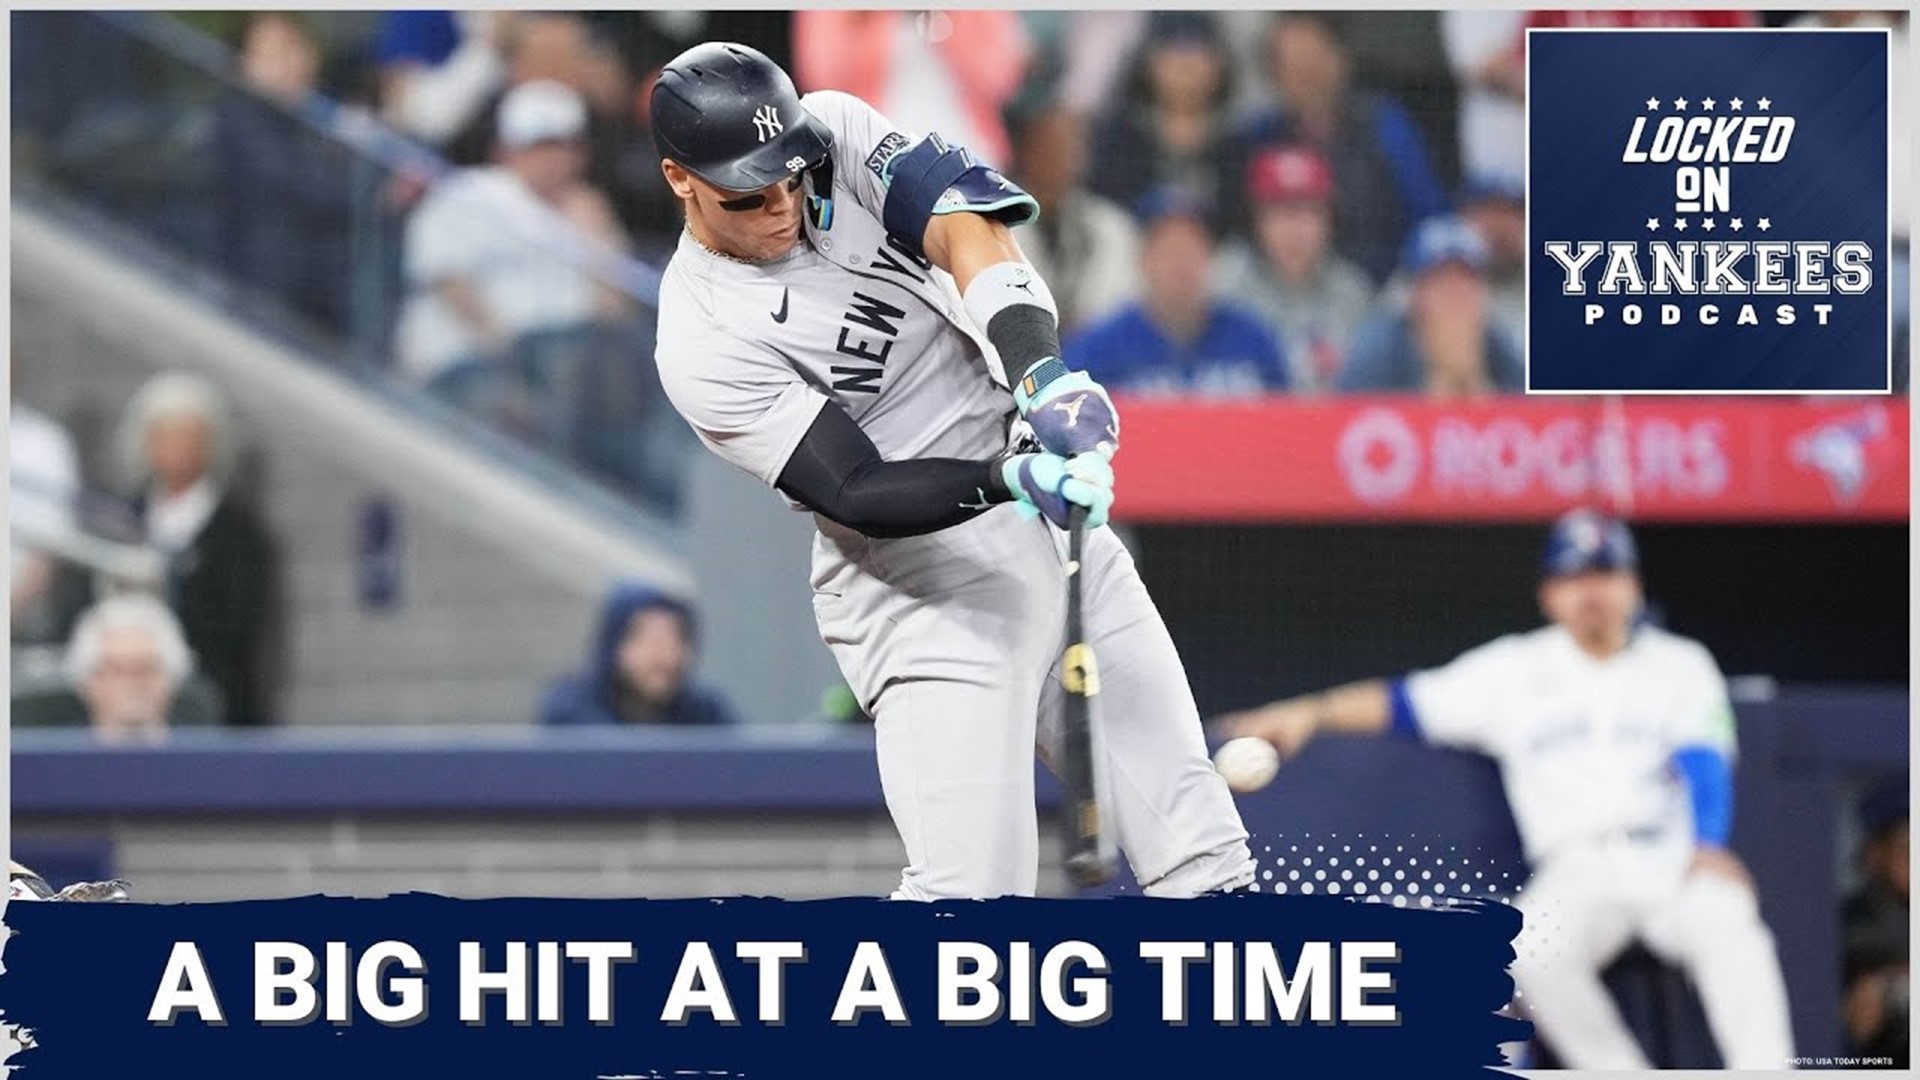 The Yankees make a big comeback to salvage the finale in Toronto and the guy who had the big hit is the guy most people are worried about, Aaron Judge.